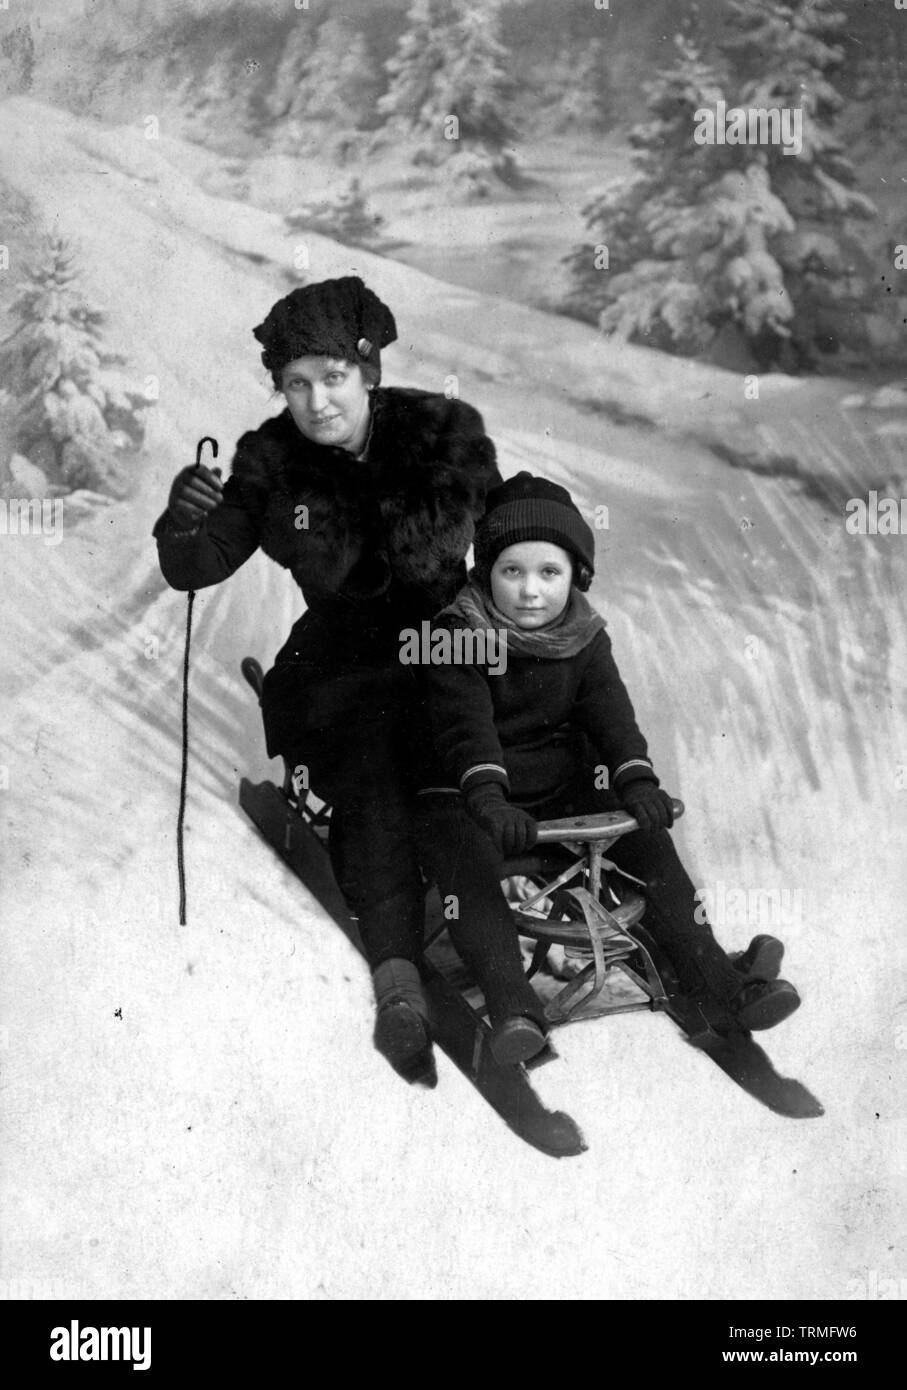 Vintage sled Black and White Stock Photos & Images - Alamy